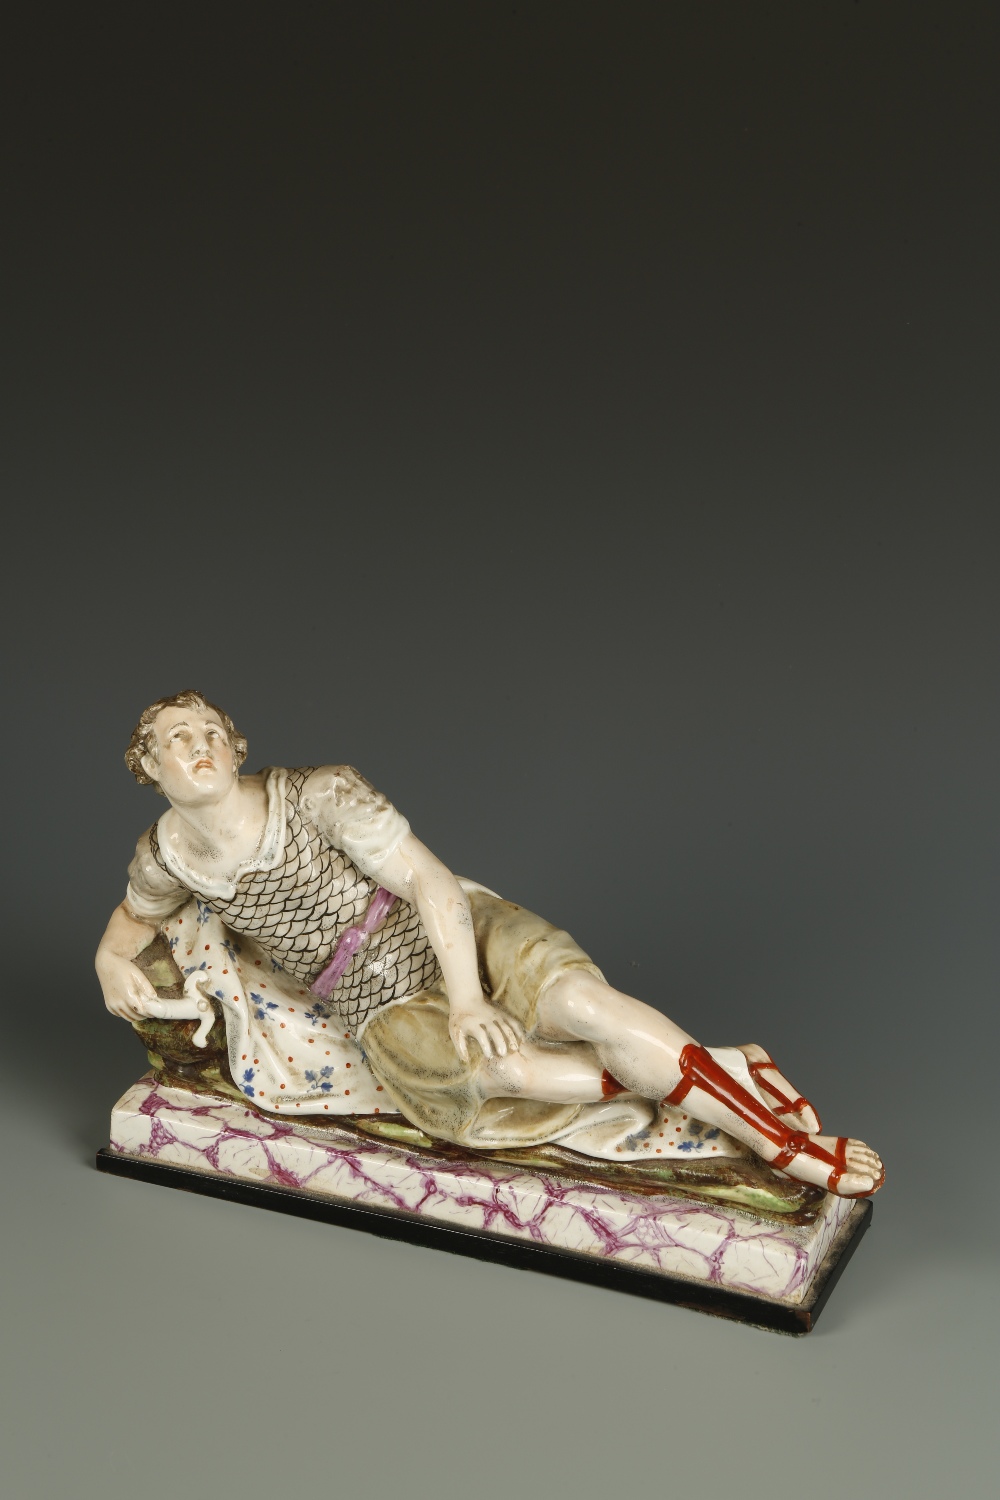 A RALPH WOOD TYPE FIGURE OF MARK ANTONY lying on a mottled and marbled effect base, 12"" wide. See